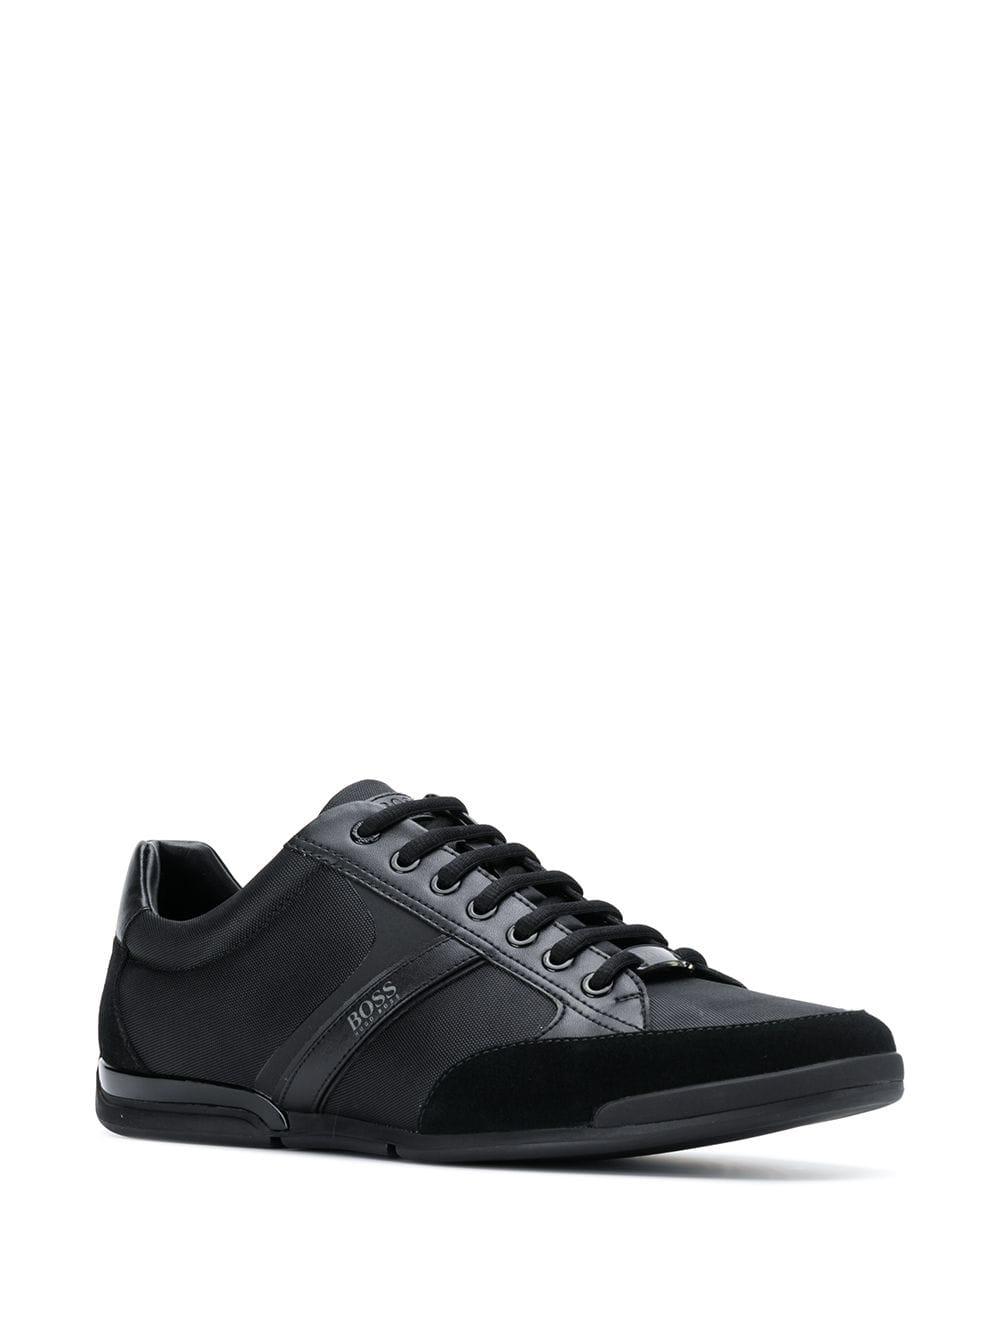 BOSS by Hugo Boss Leather Lace-up Sneakers in Black for Men - Lyst